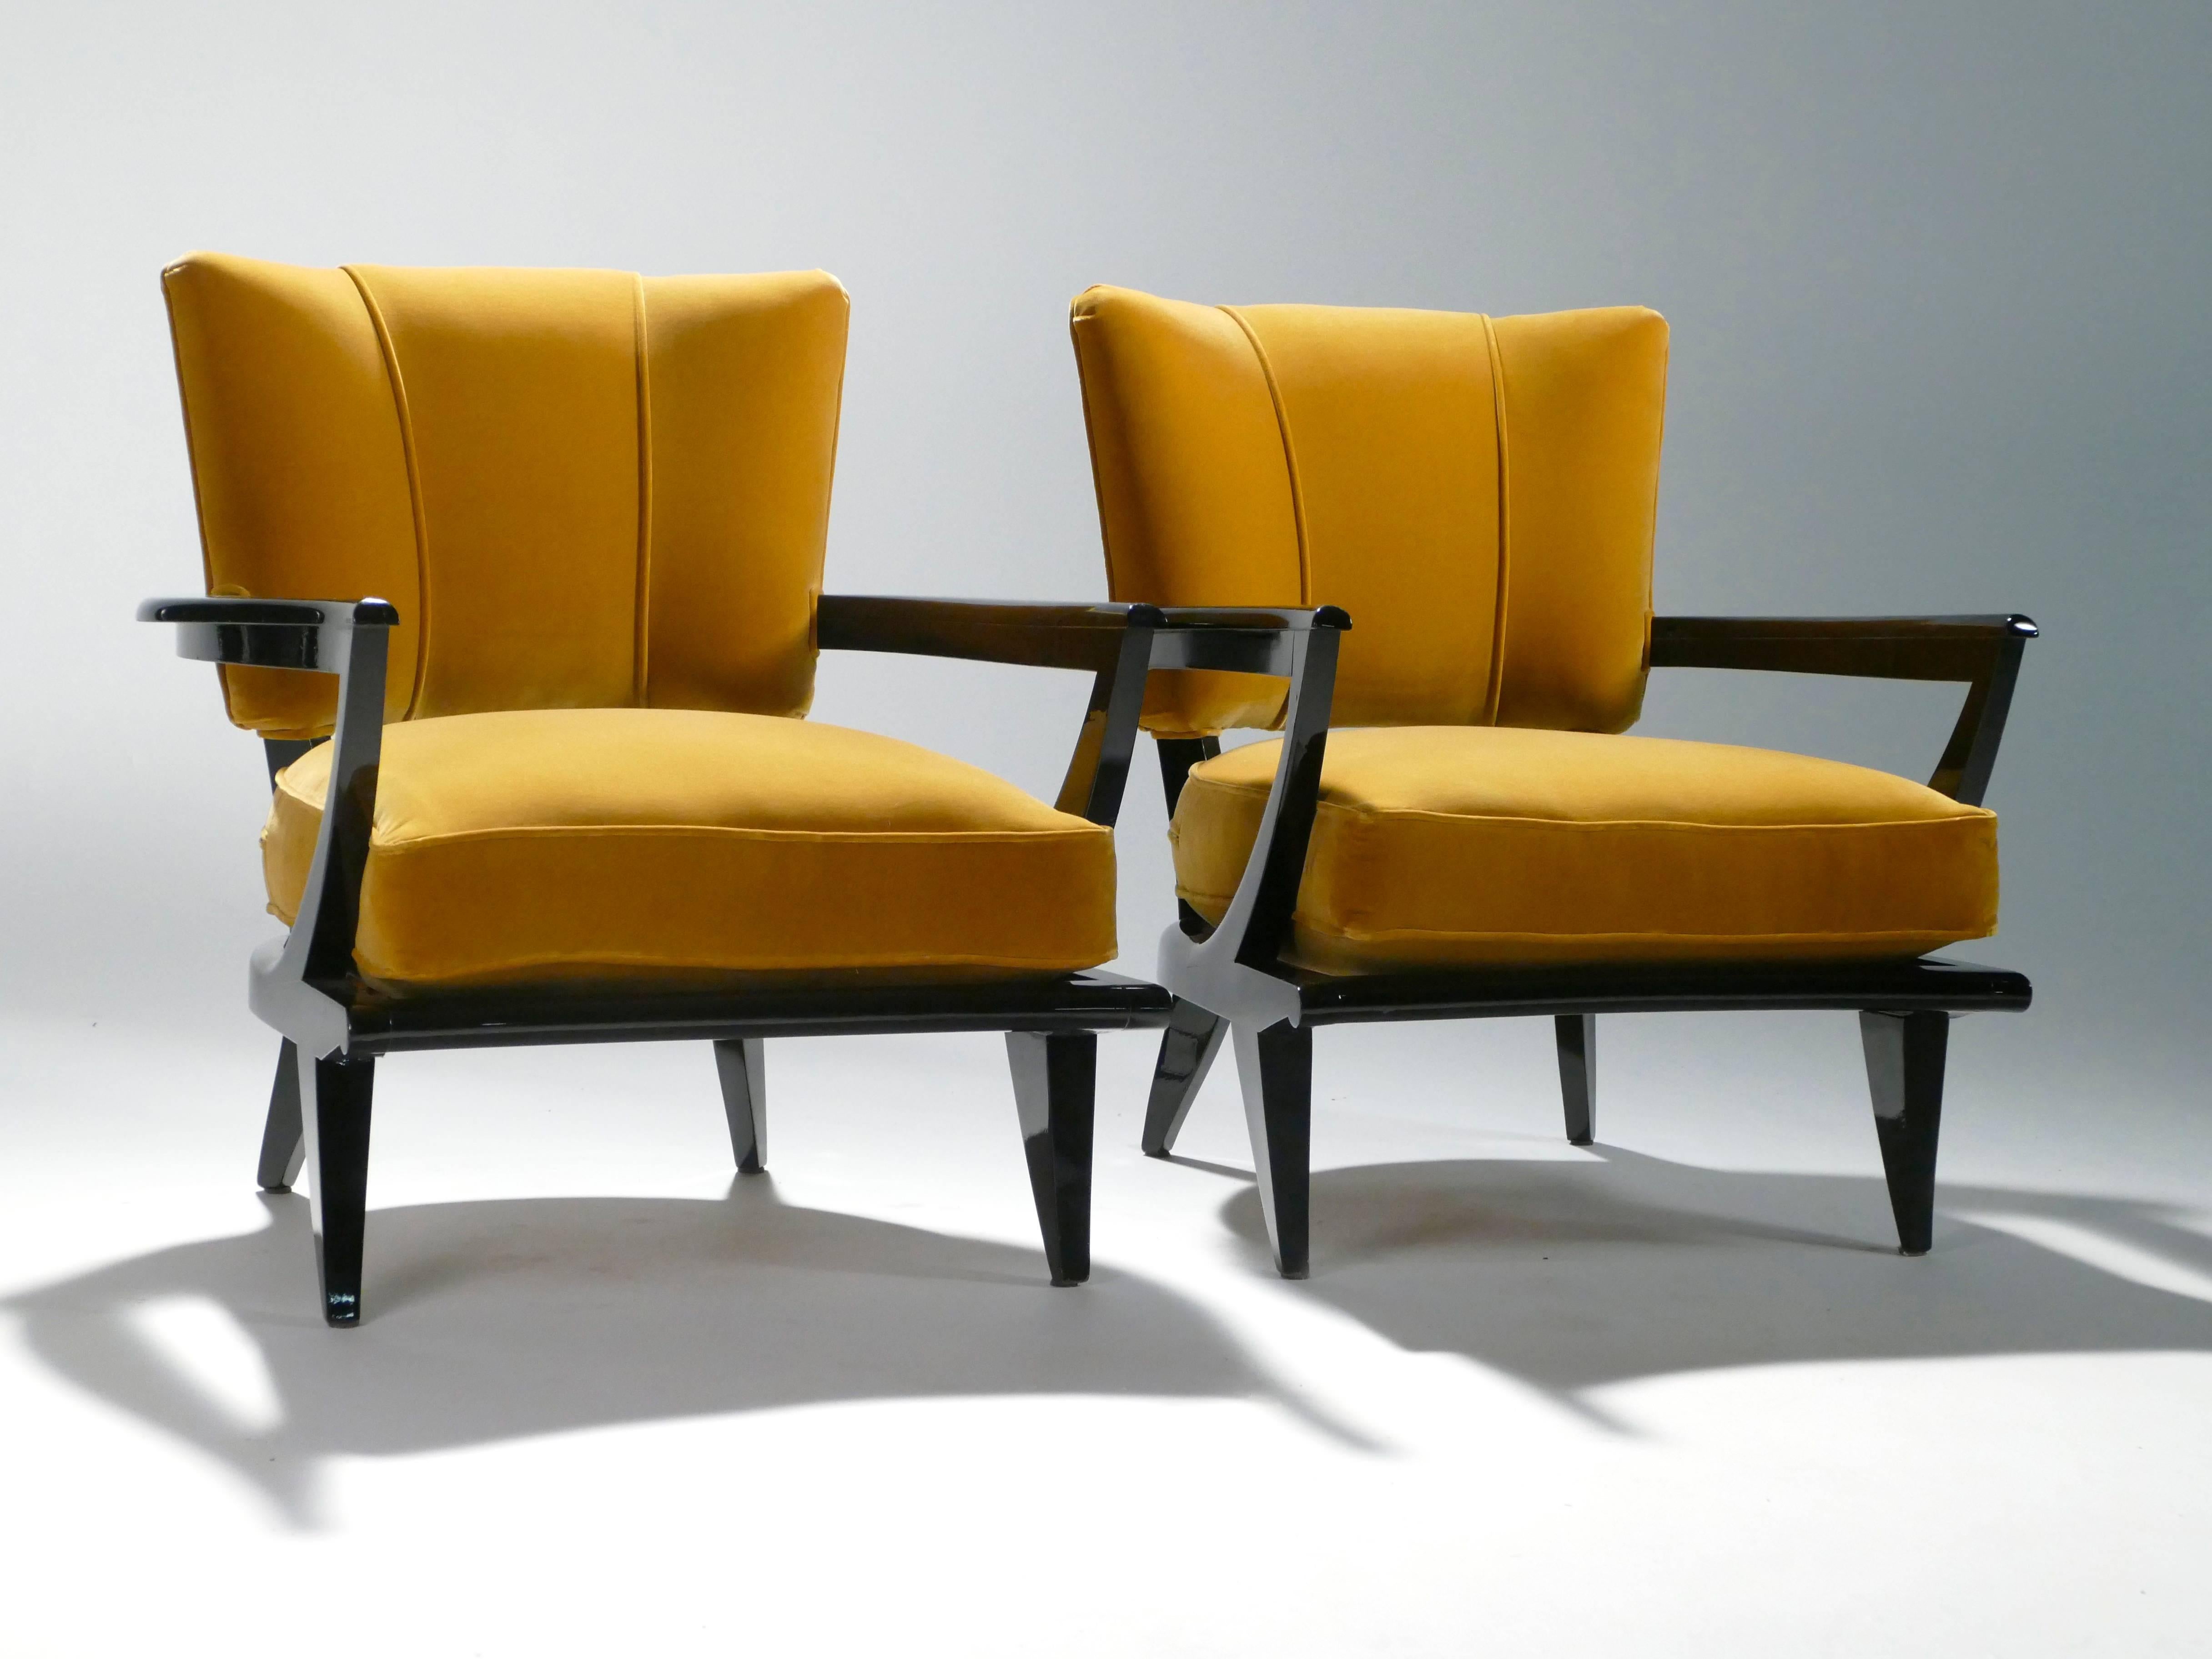 These twin armchairs have been recently reupholstered with fabric by Osborne & Little: Mikado Velvet in a trendy ocher color that complements the original rich black wood. The smart contrast between the supple fabric chair backs and lustrous wood